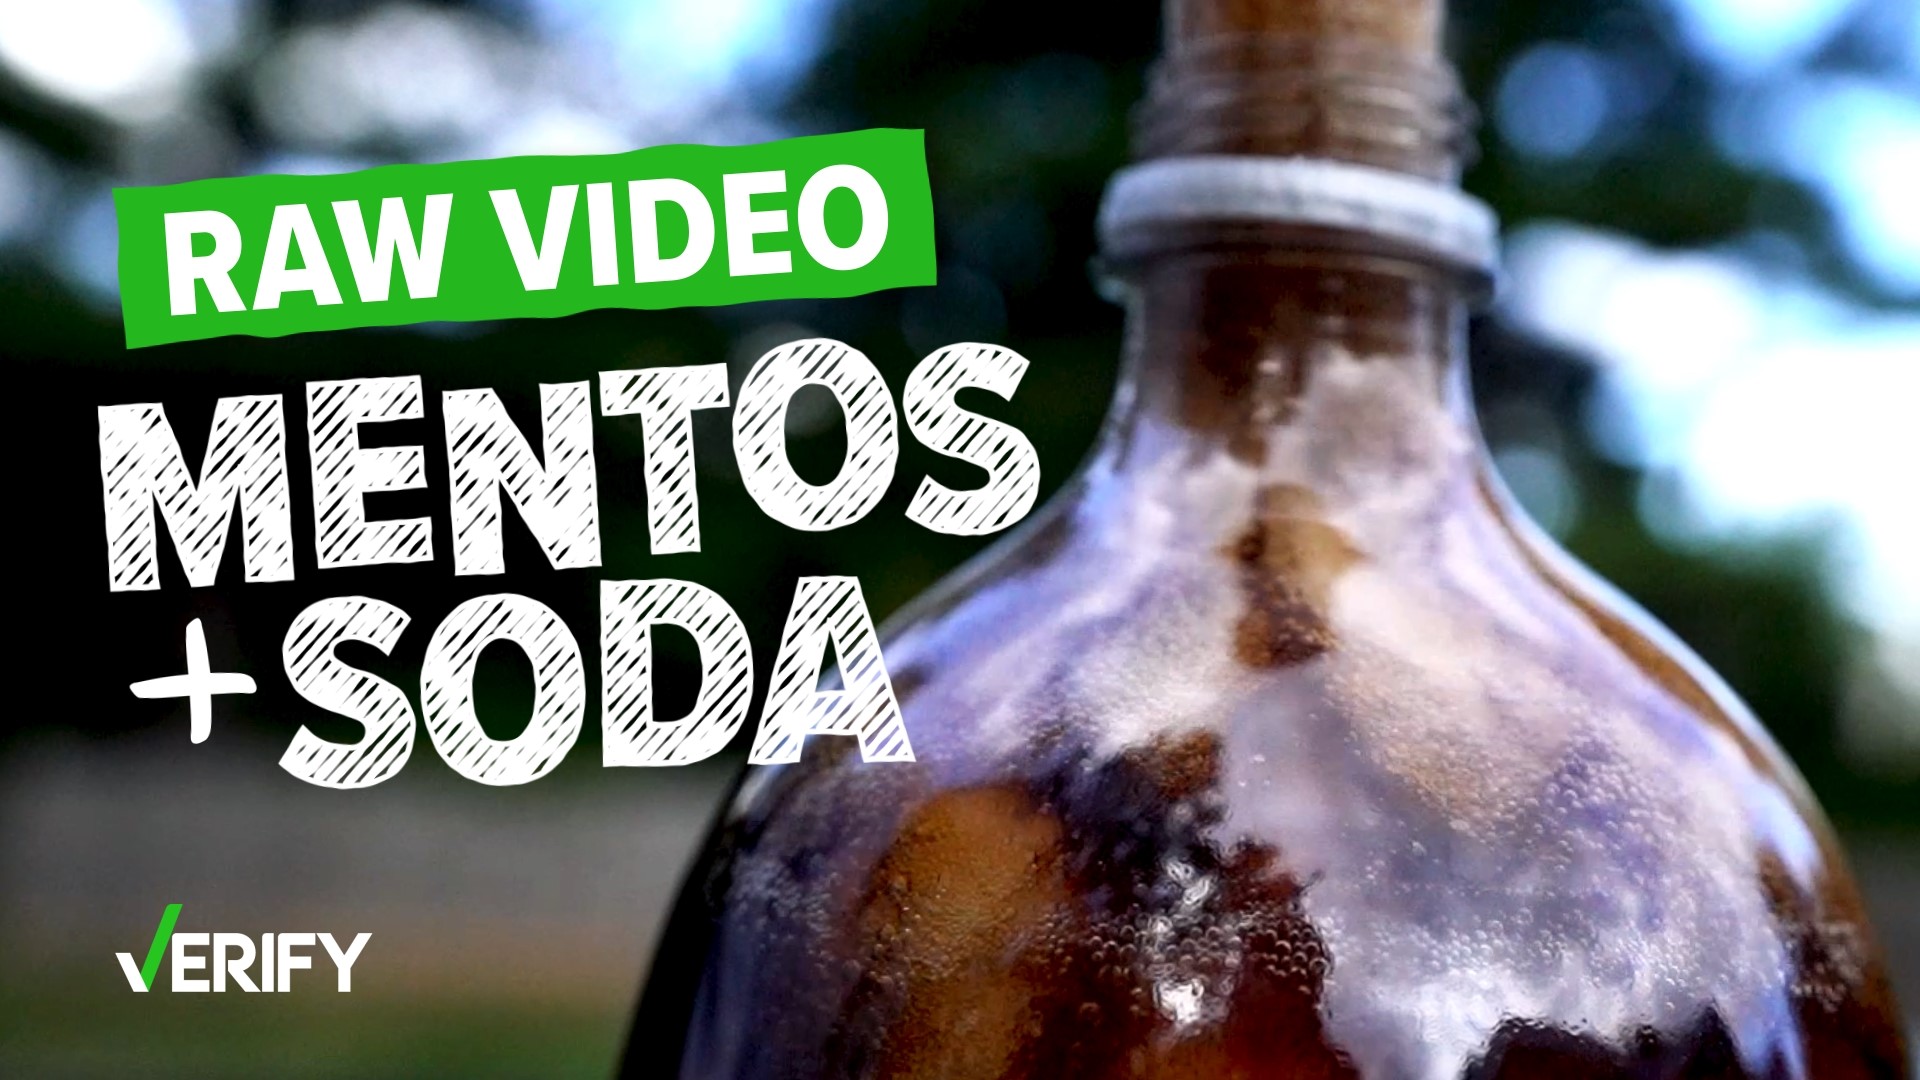 Ariane Datil tests if putting Mentos into any soda make it explode.